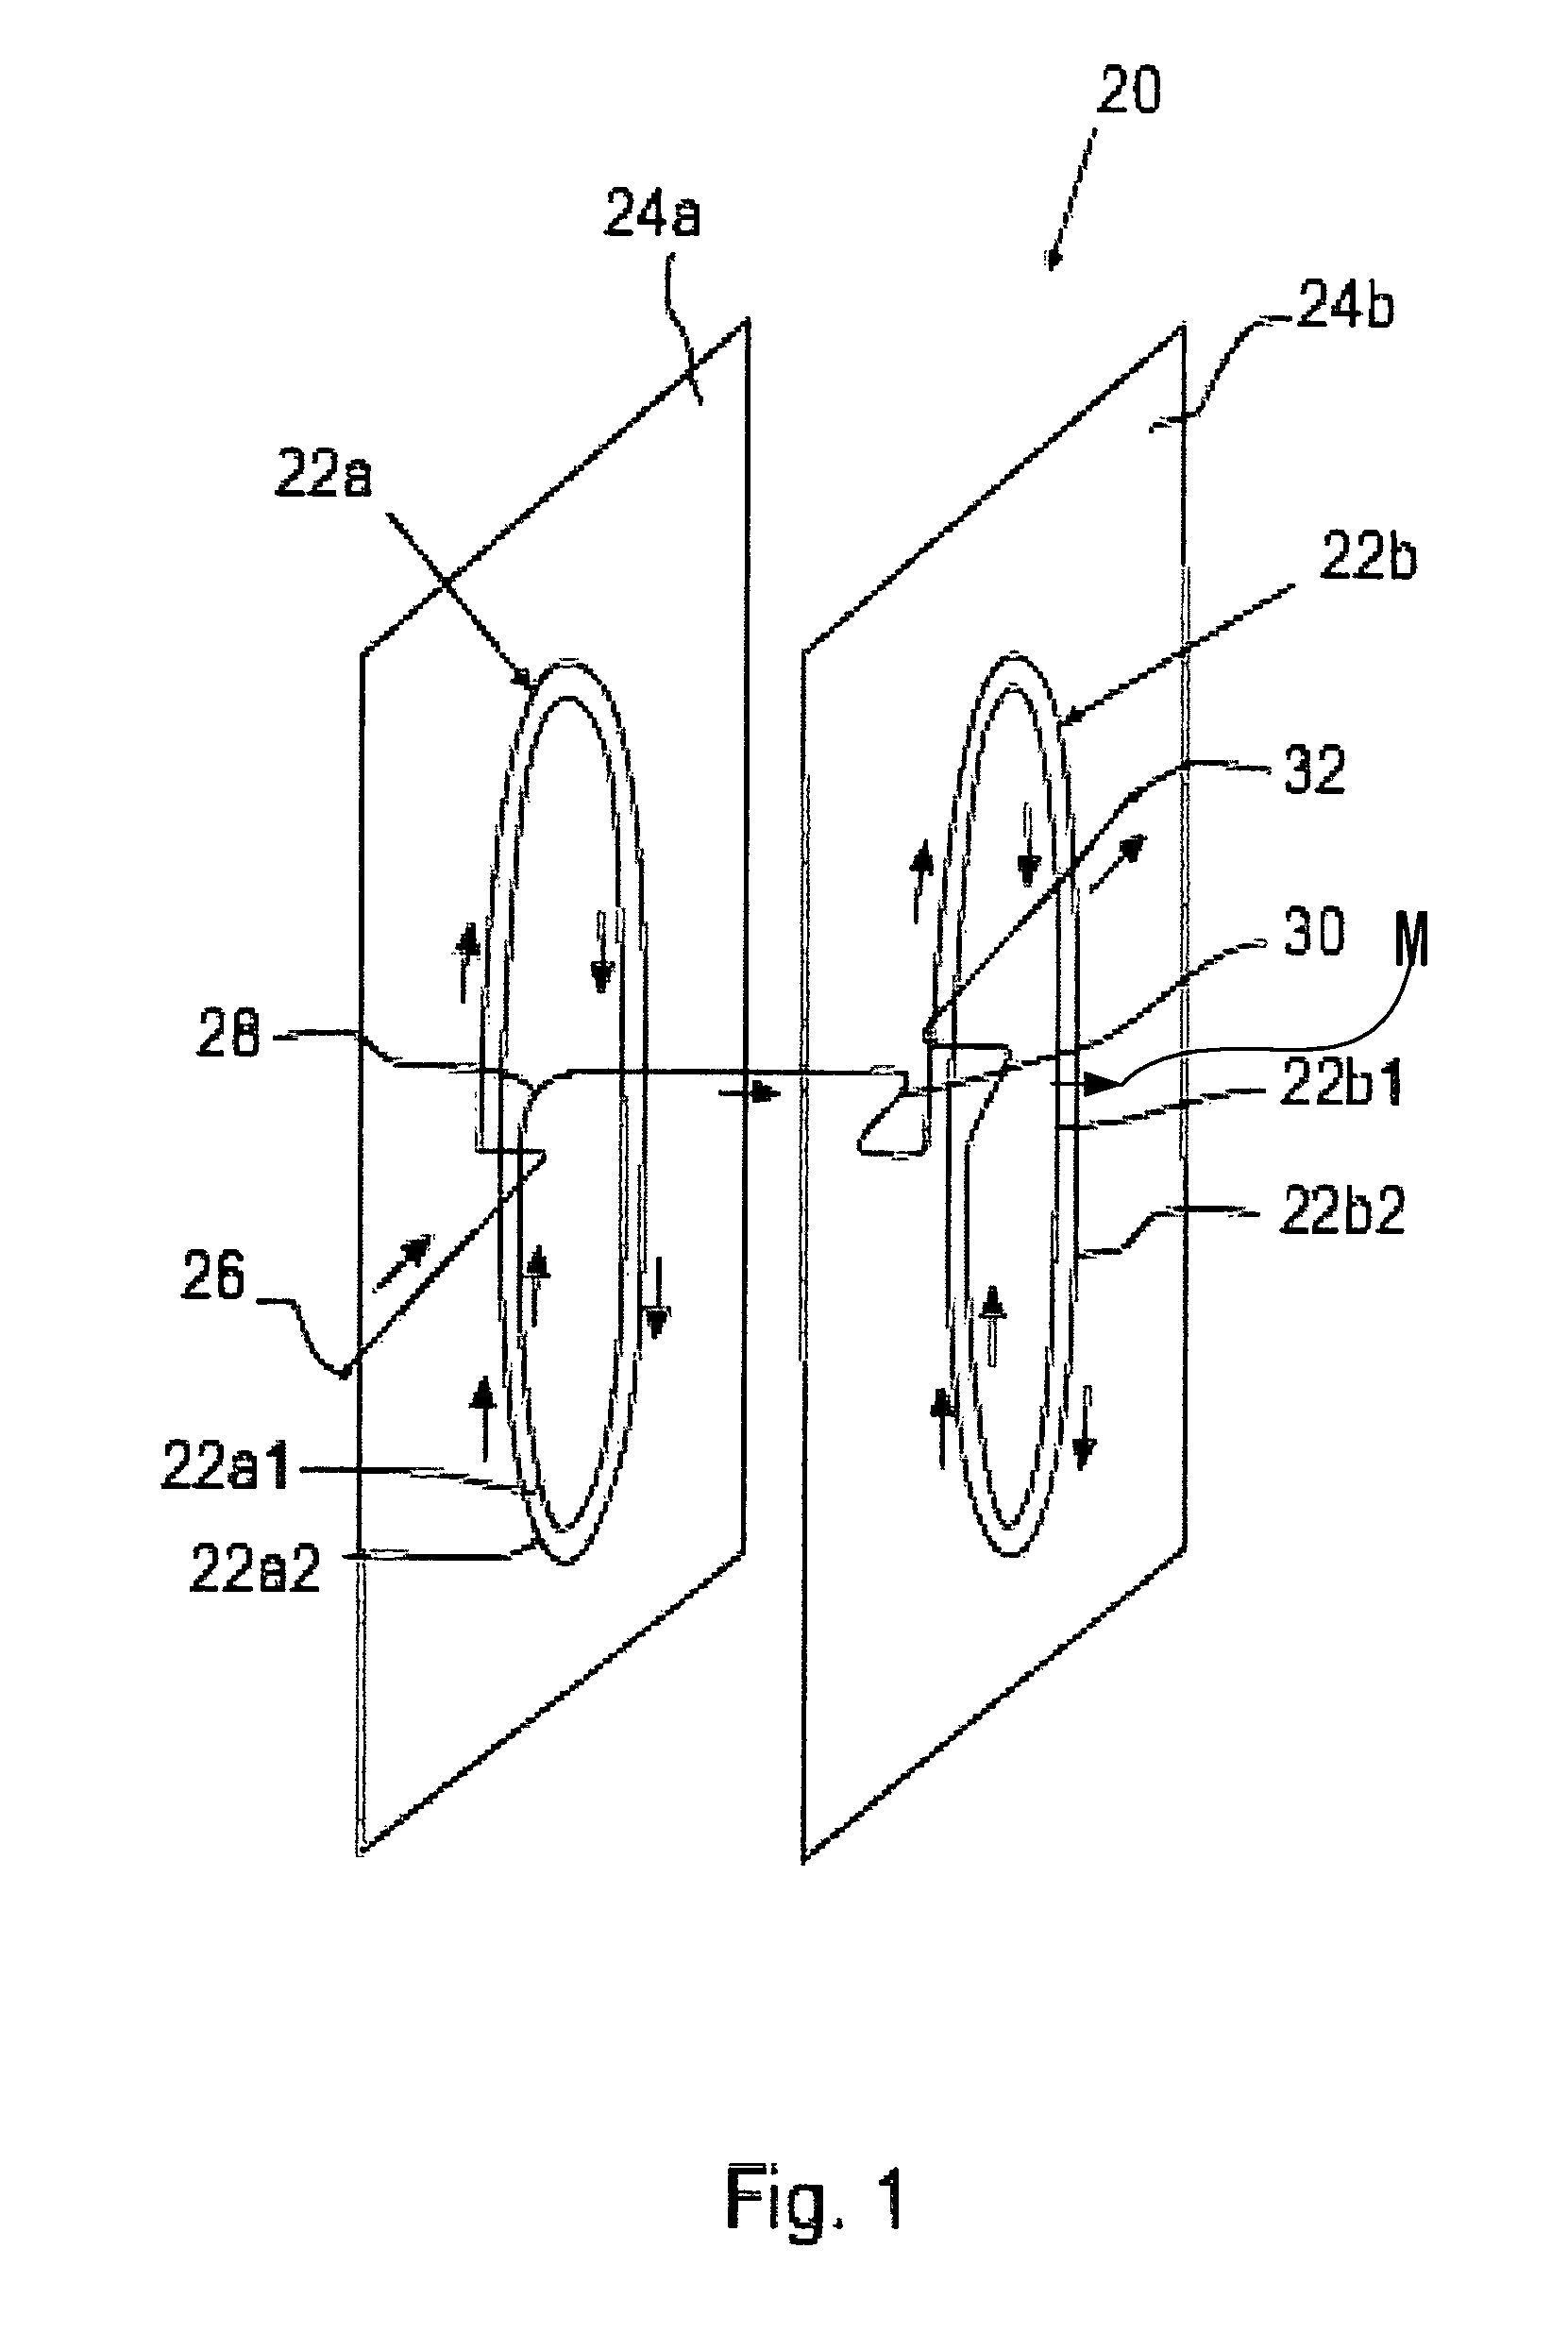 RF antenna assembly for treatment of inner surfaces of tubes with inductively coupled plasma